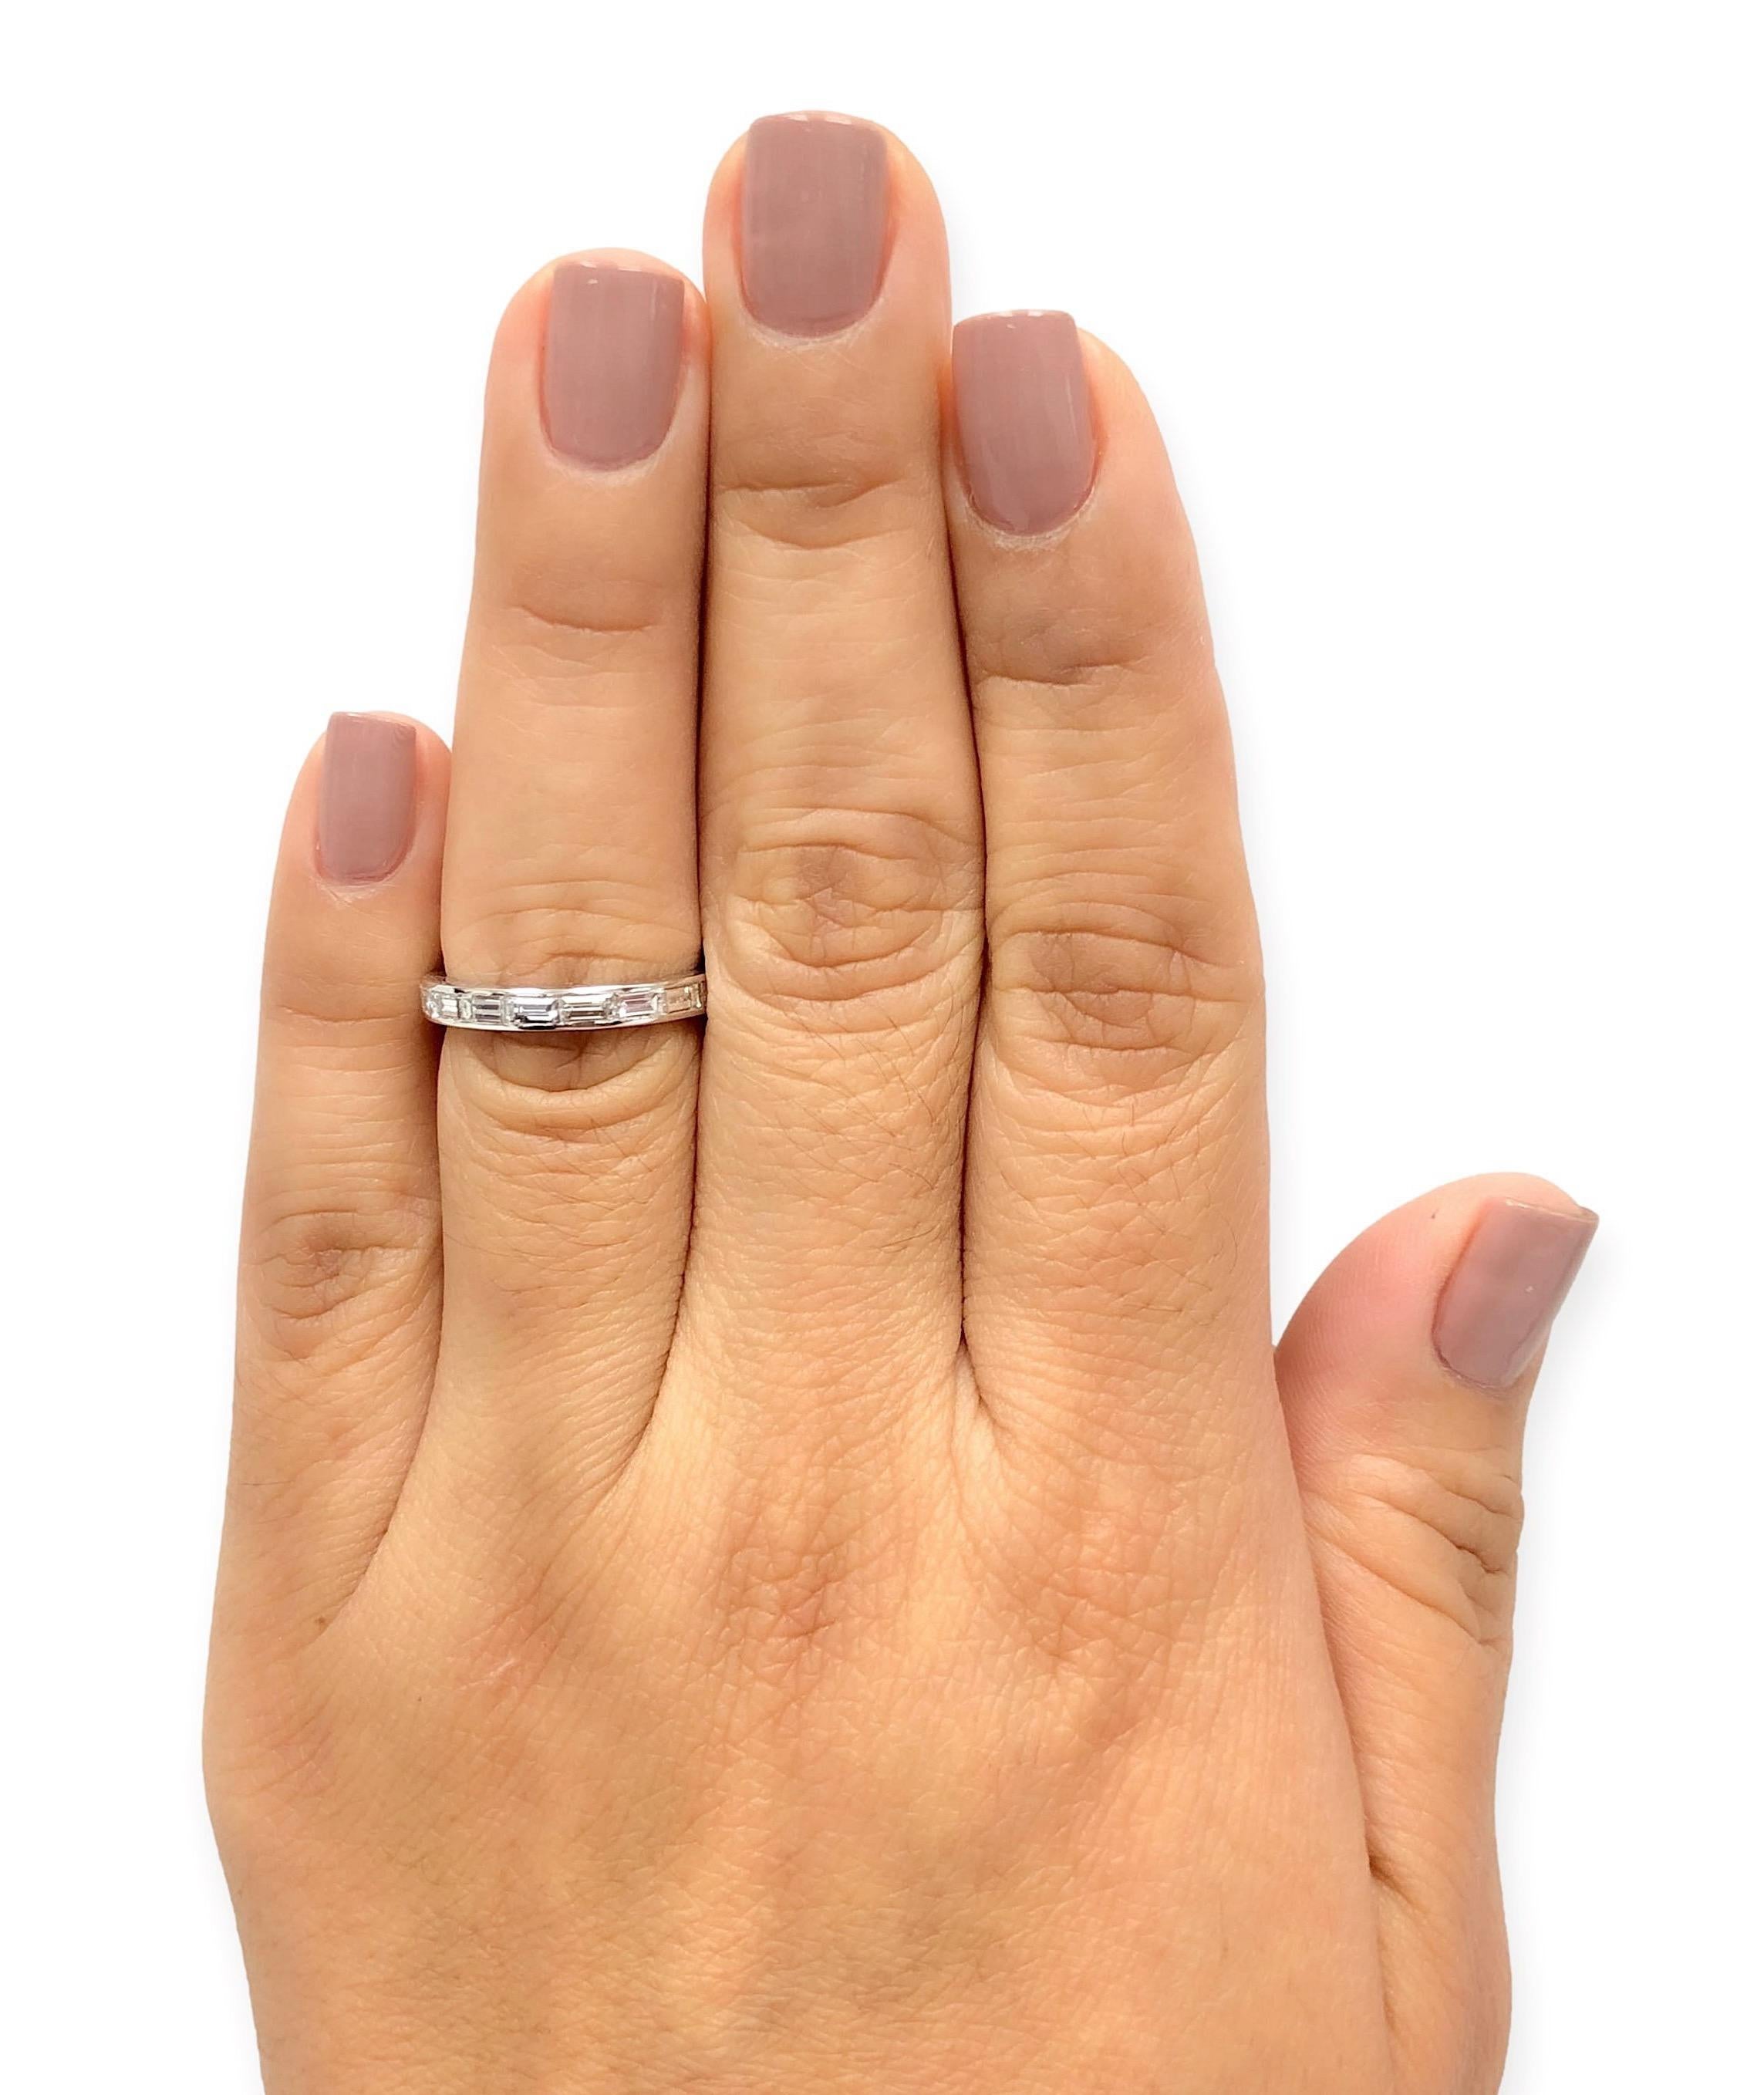 Weinlese Tiffany & Co. Platin Baguette Channel 3mm Bandring im Zustand „Gut“ im Angebot in New York, NY